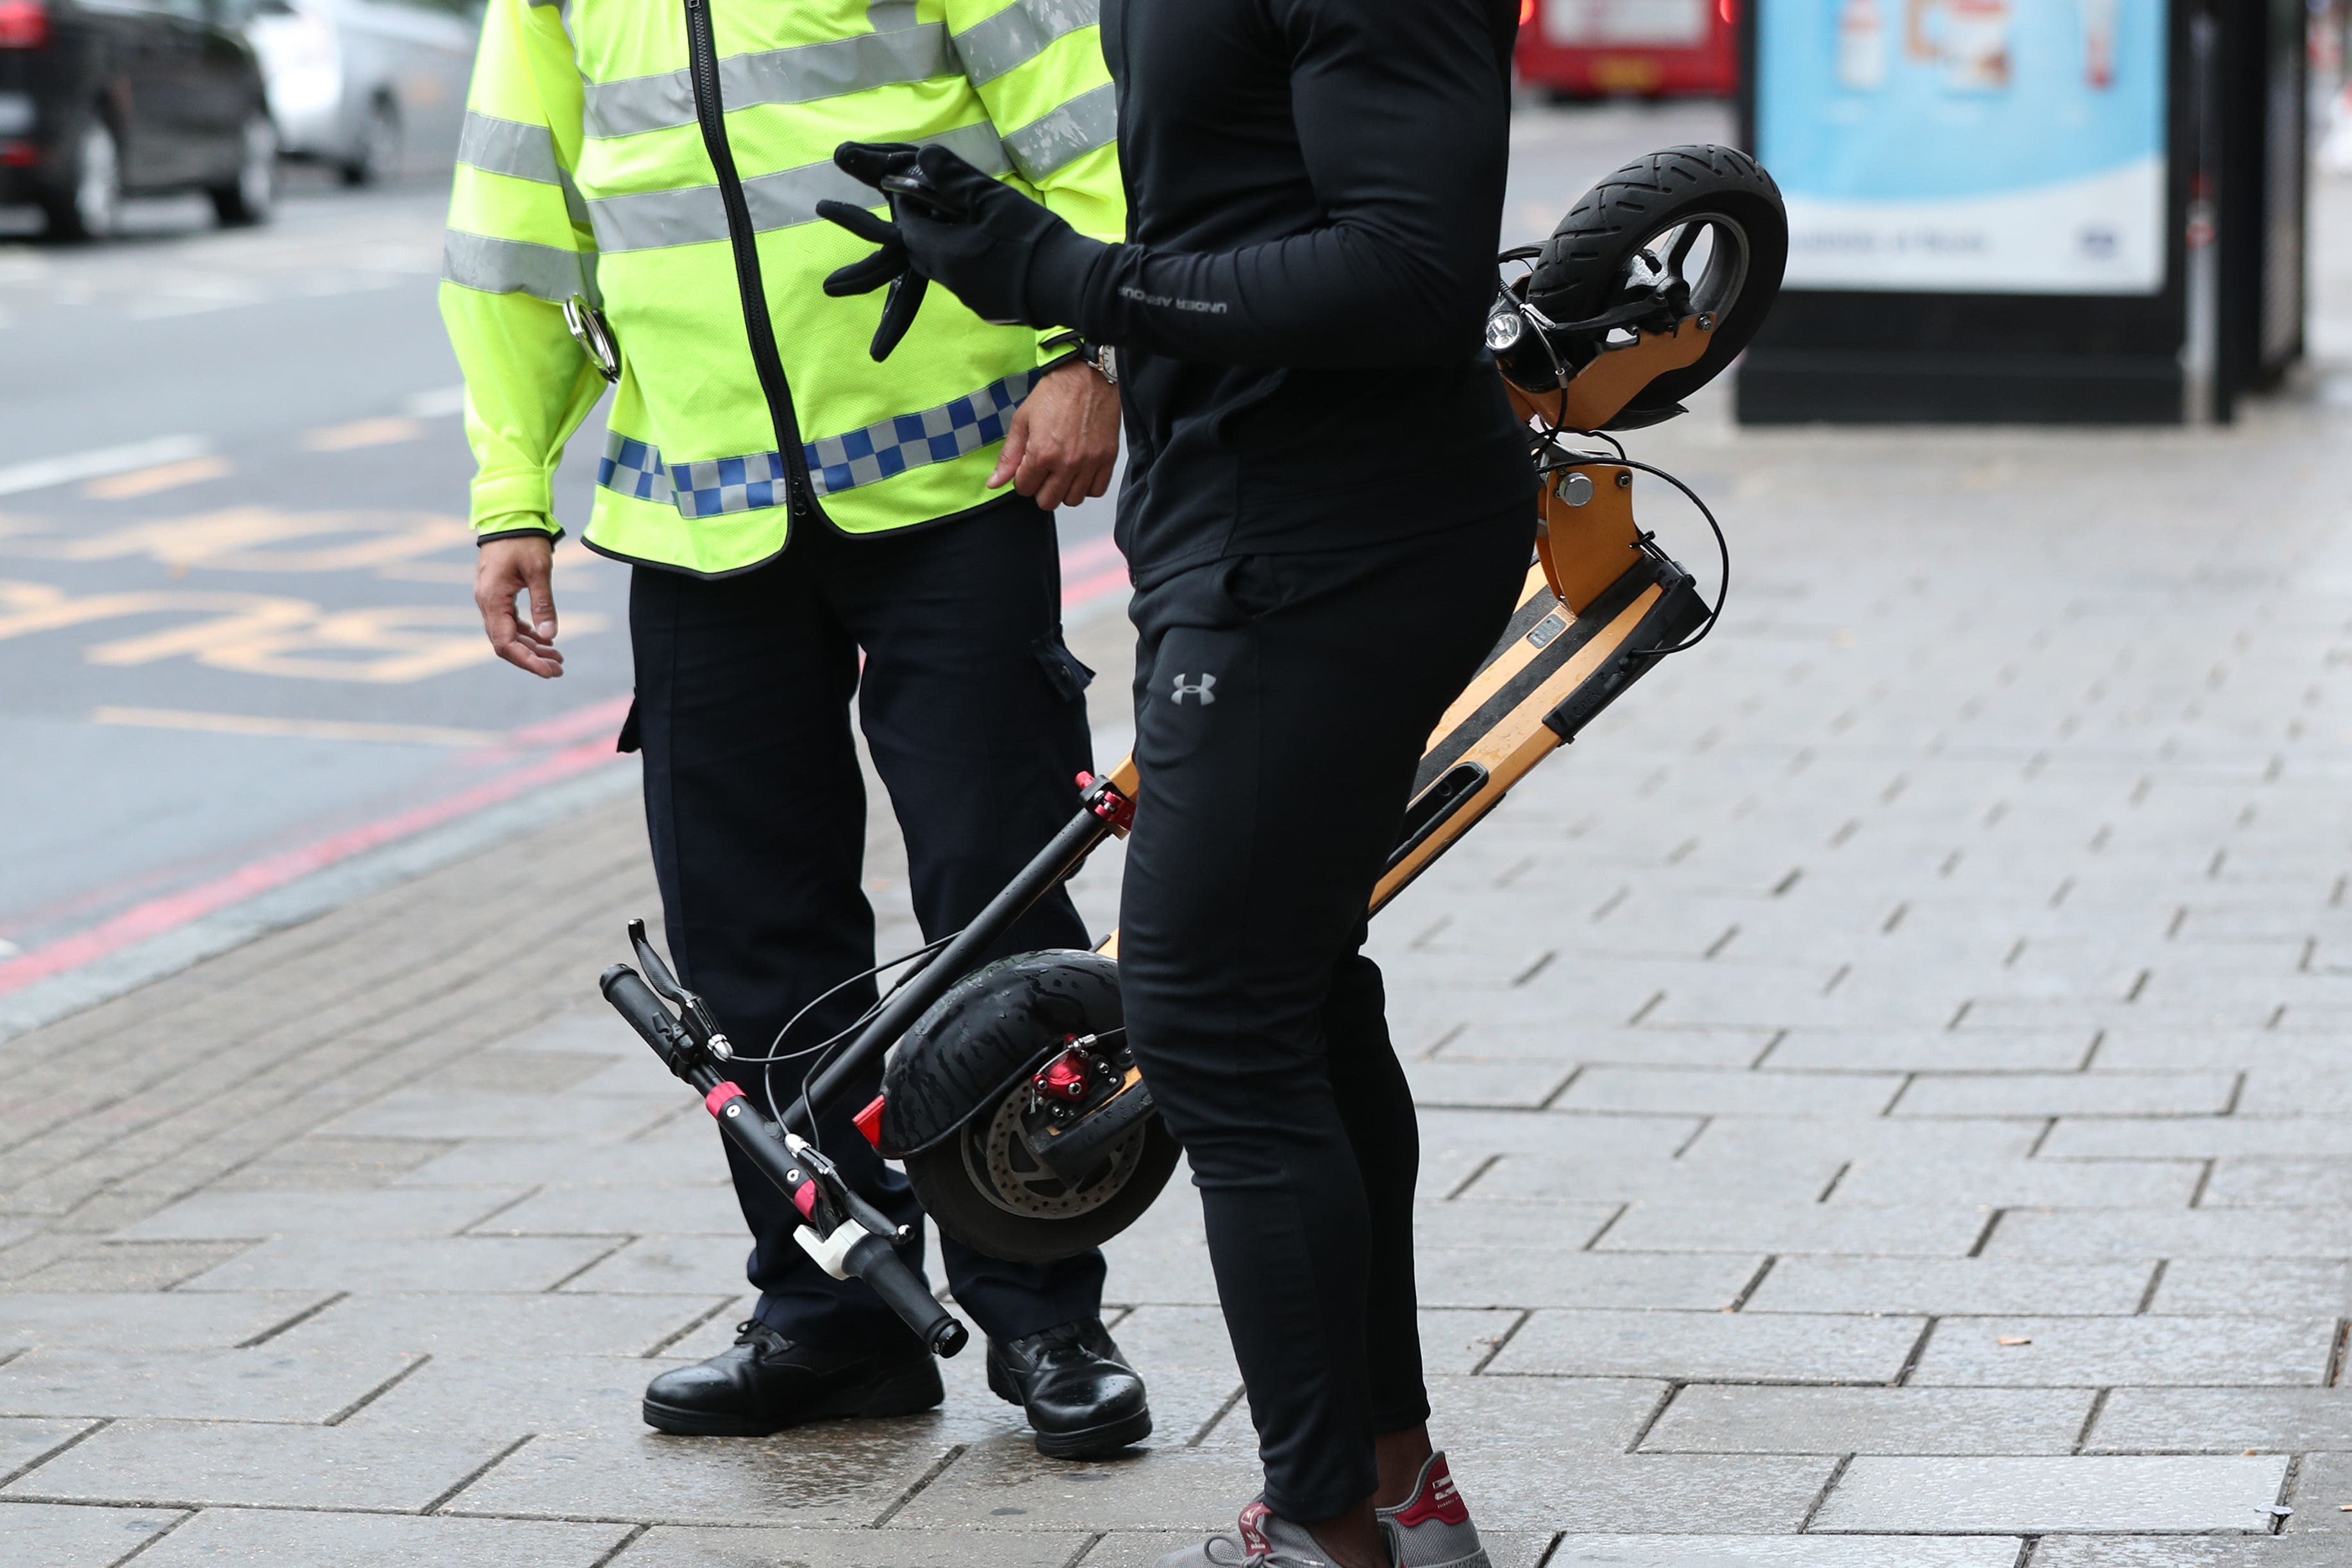 An e-scooter rider is stopped by a police officer in Islington (Yui Mok/PA)